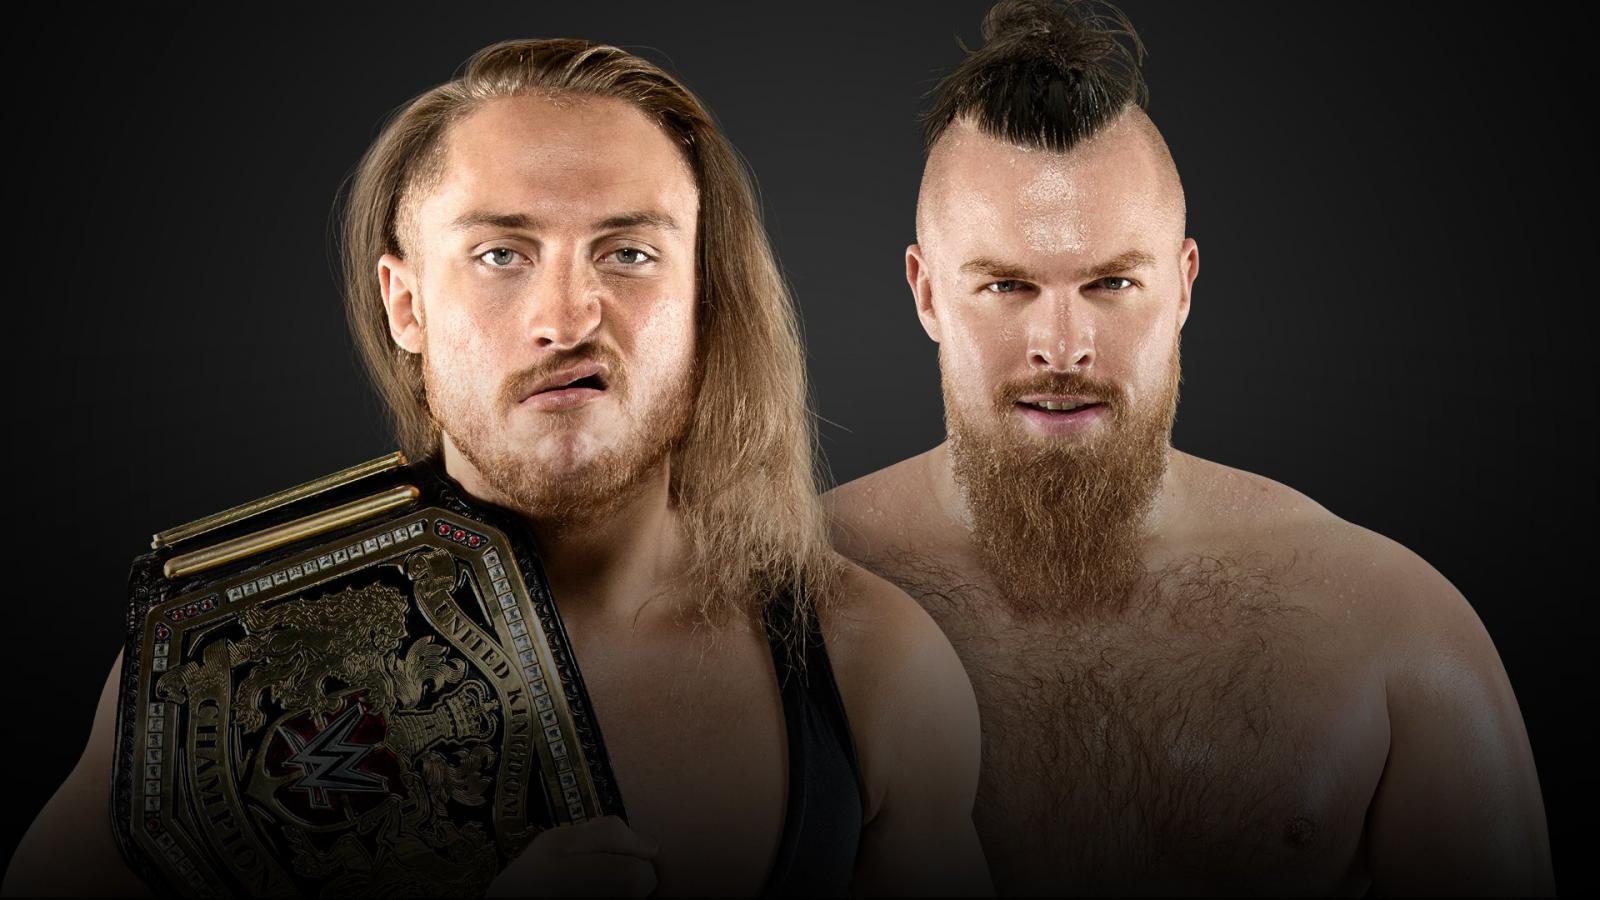 What to Expect at Today’s WWE NXT Takeover: Blackpool Event